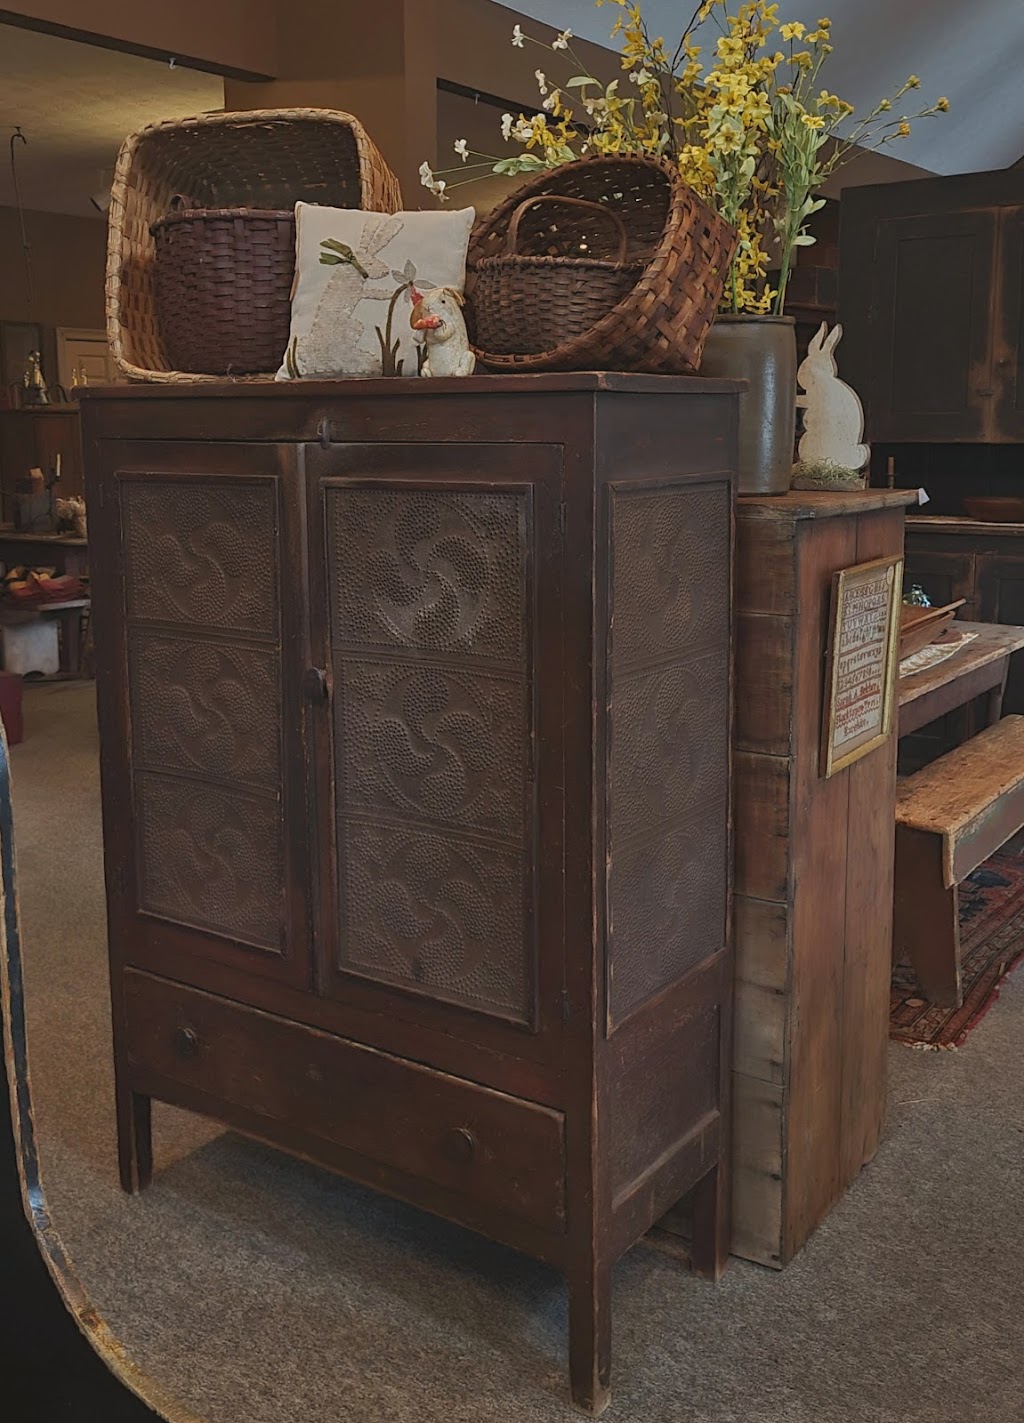 Early Country Antiques Interiors & Designs | 185 High St, Waynesville, OH 45068 | Phone: (513) 855-1007